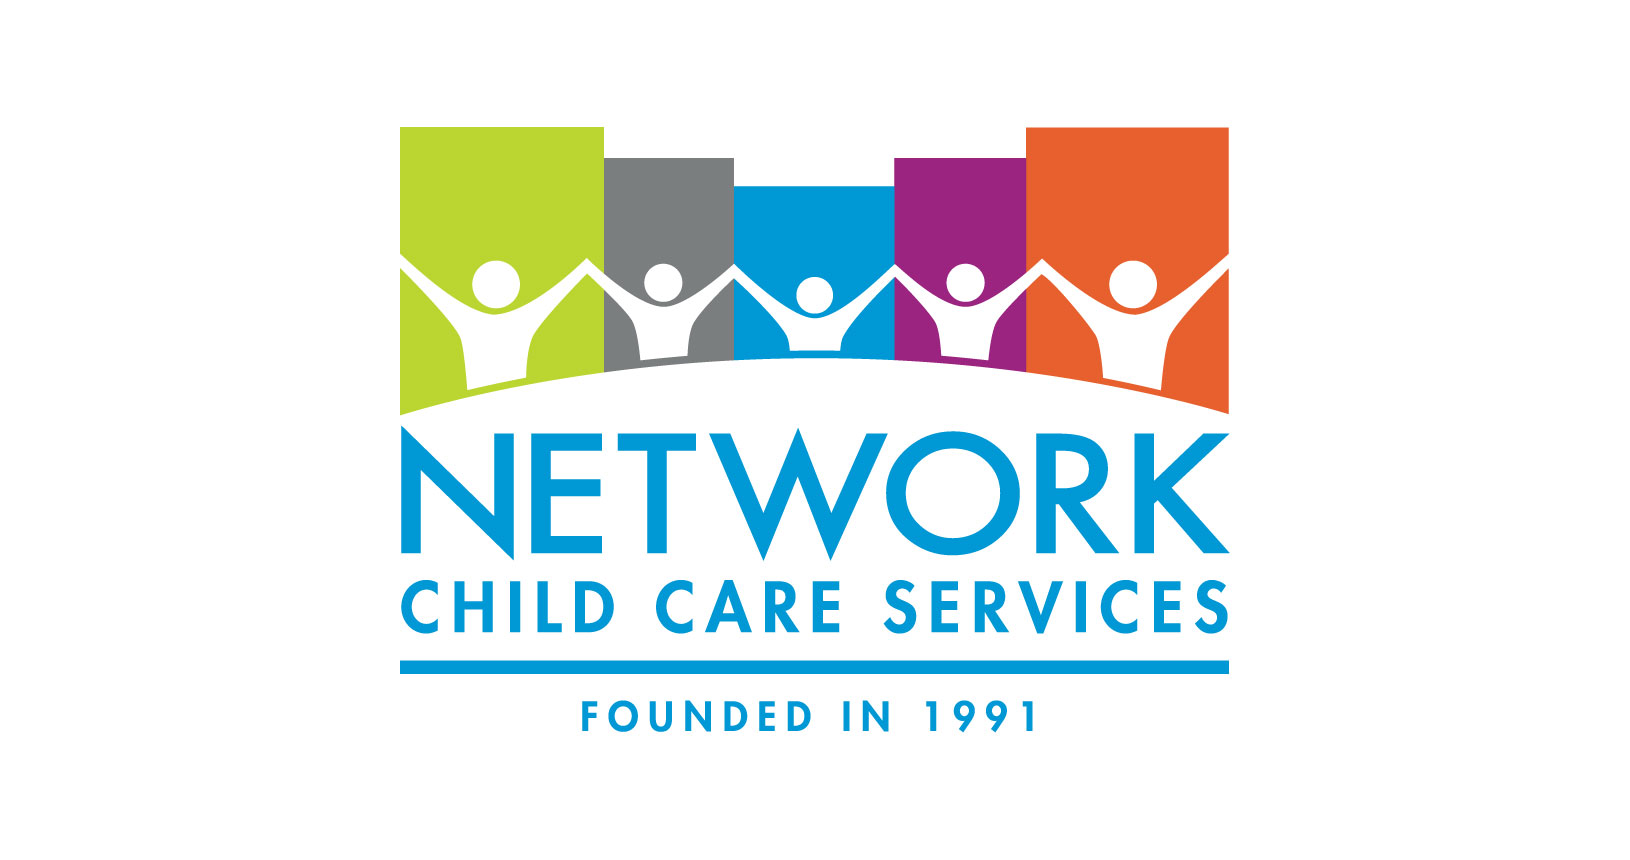 Network Child Care Services Logo - Founded in 1991